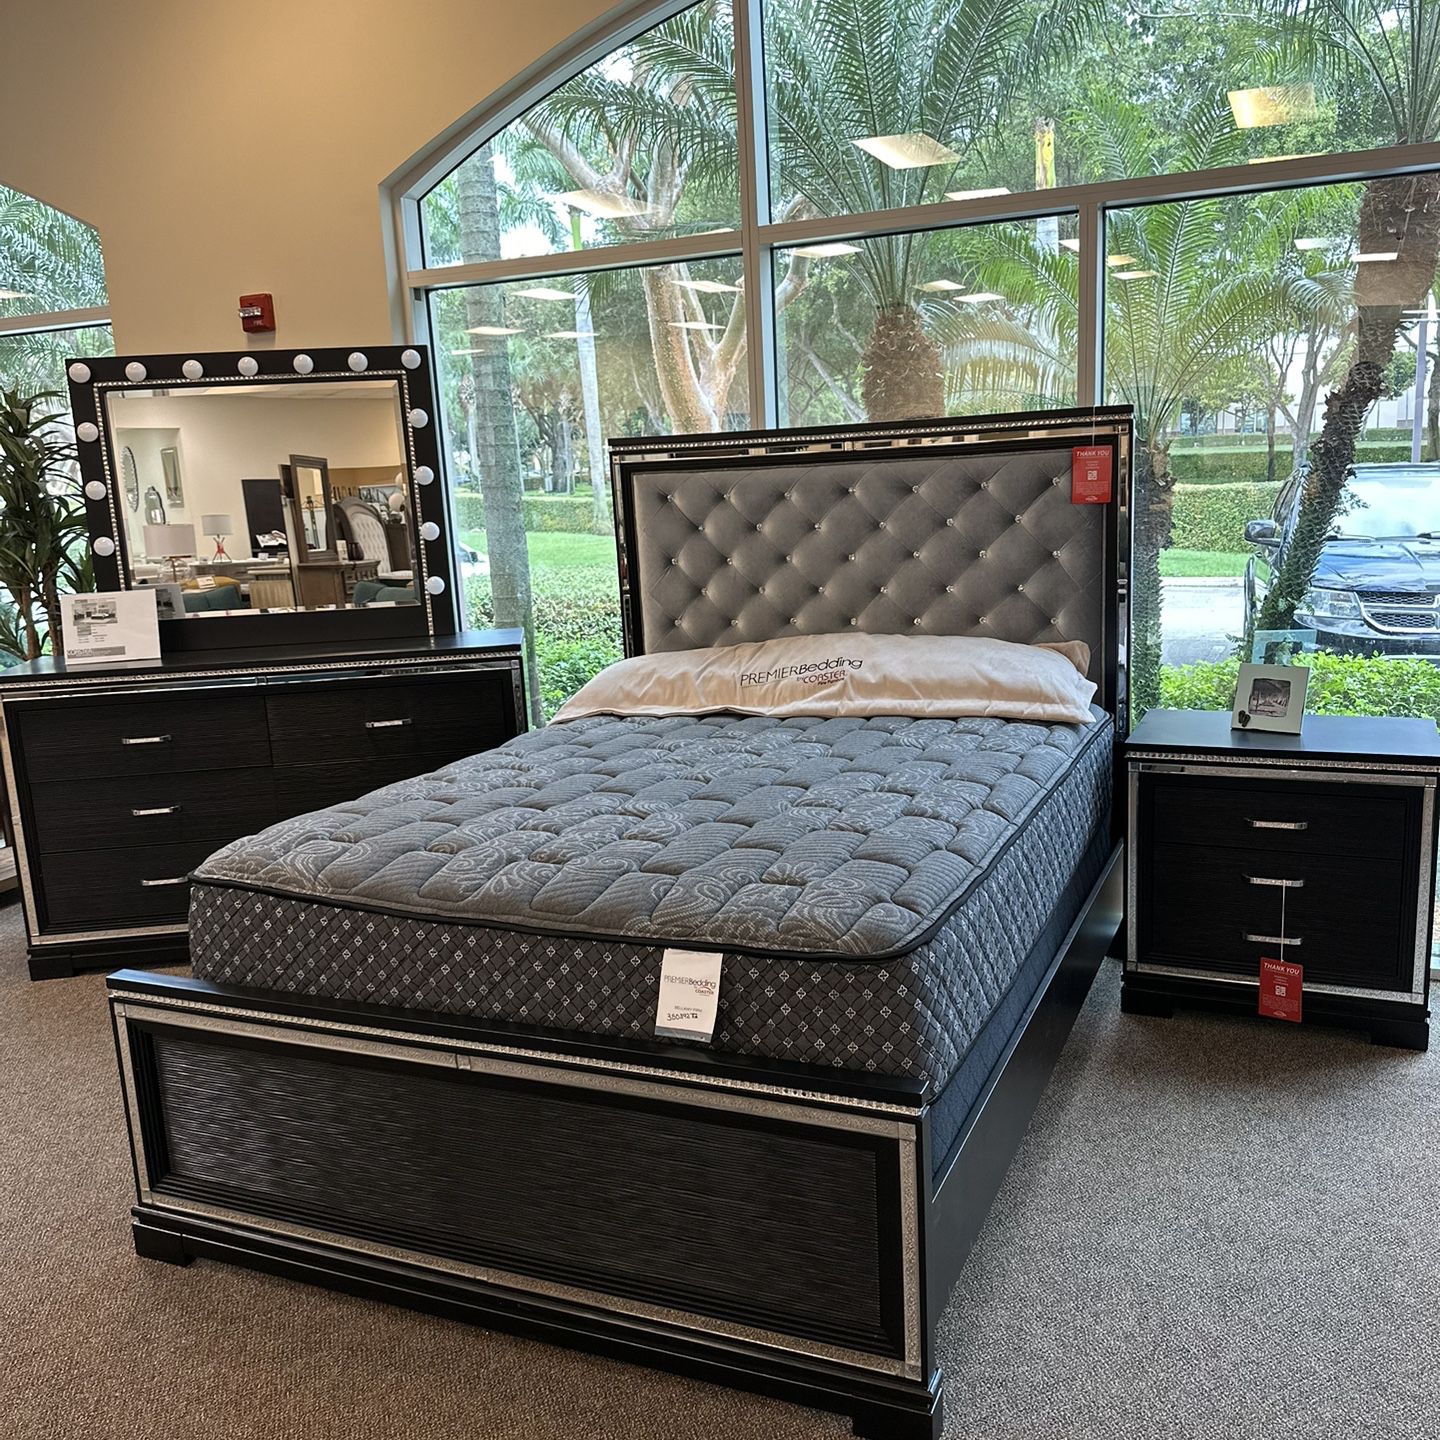 Brand new bed frame in box- Flexible Payment options available $39 down. (Limited supply). 